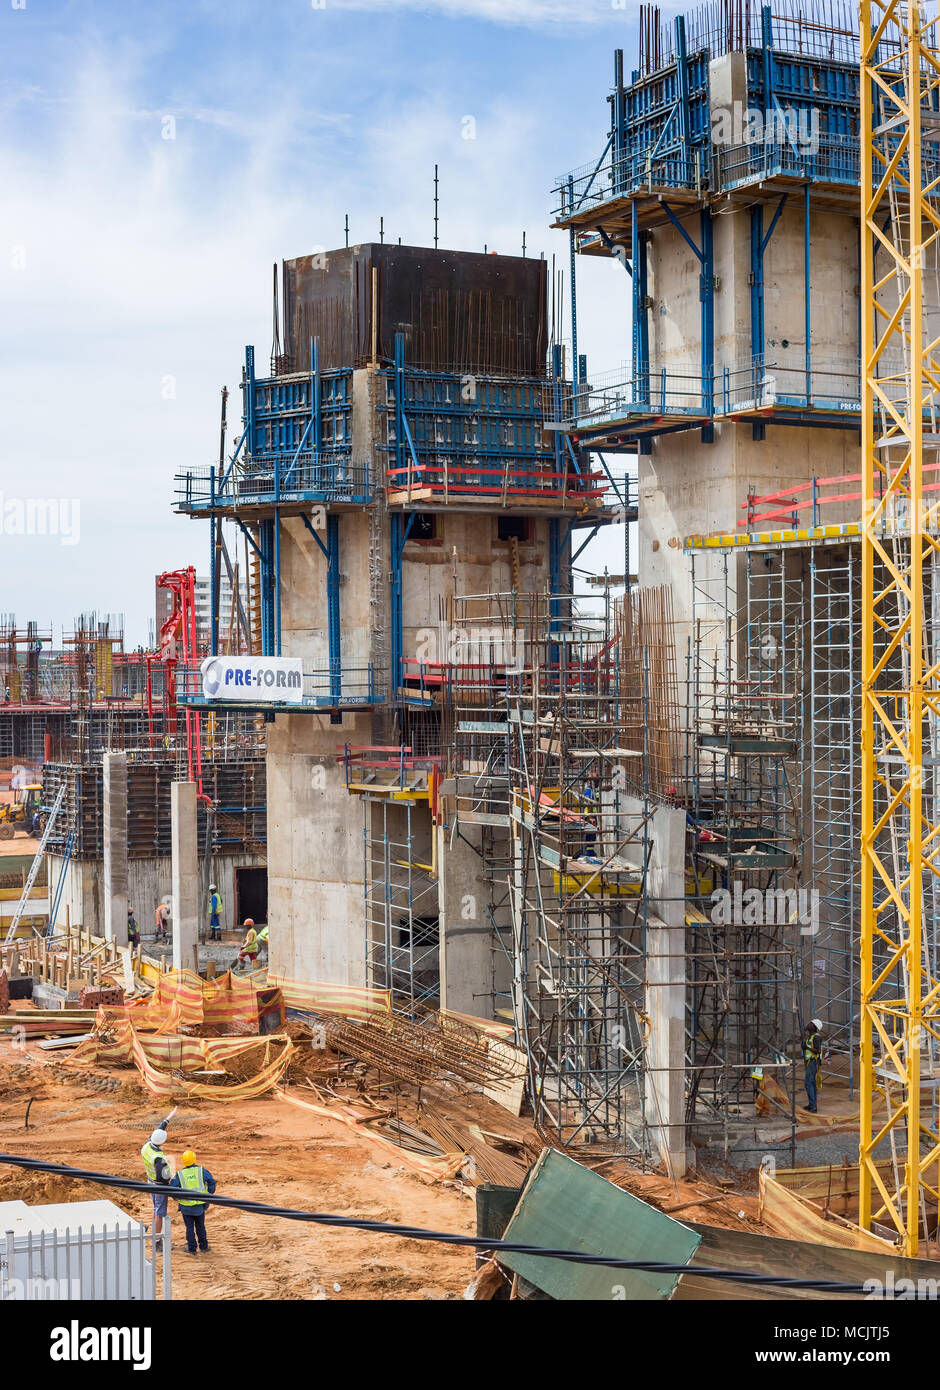 Durban, South Africa, April 9 - 2018: Construction site with cement formwork and scaffolding. The site is part of a large scale apartments development Stock Photo